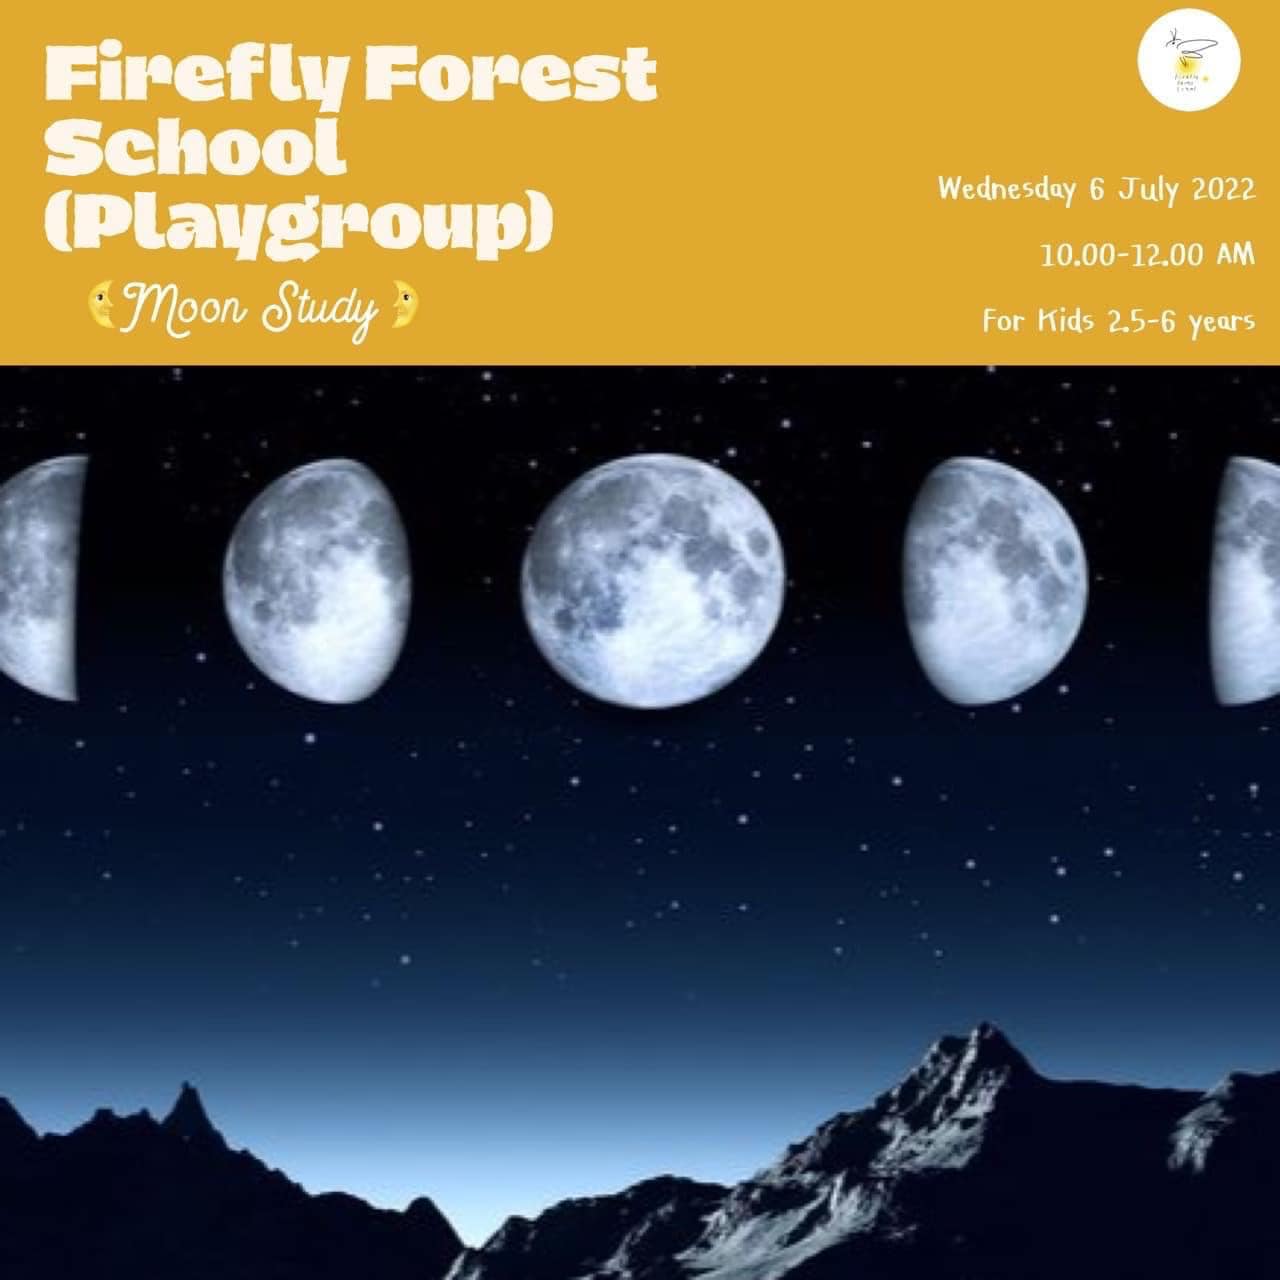 We invite you to join our Nature Classroom.
This week we have “Moon Study Week” ...